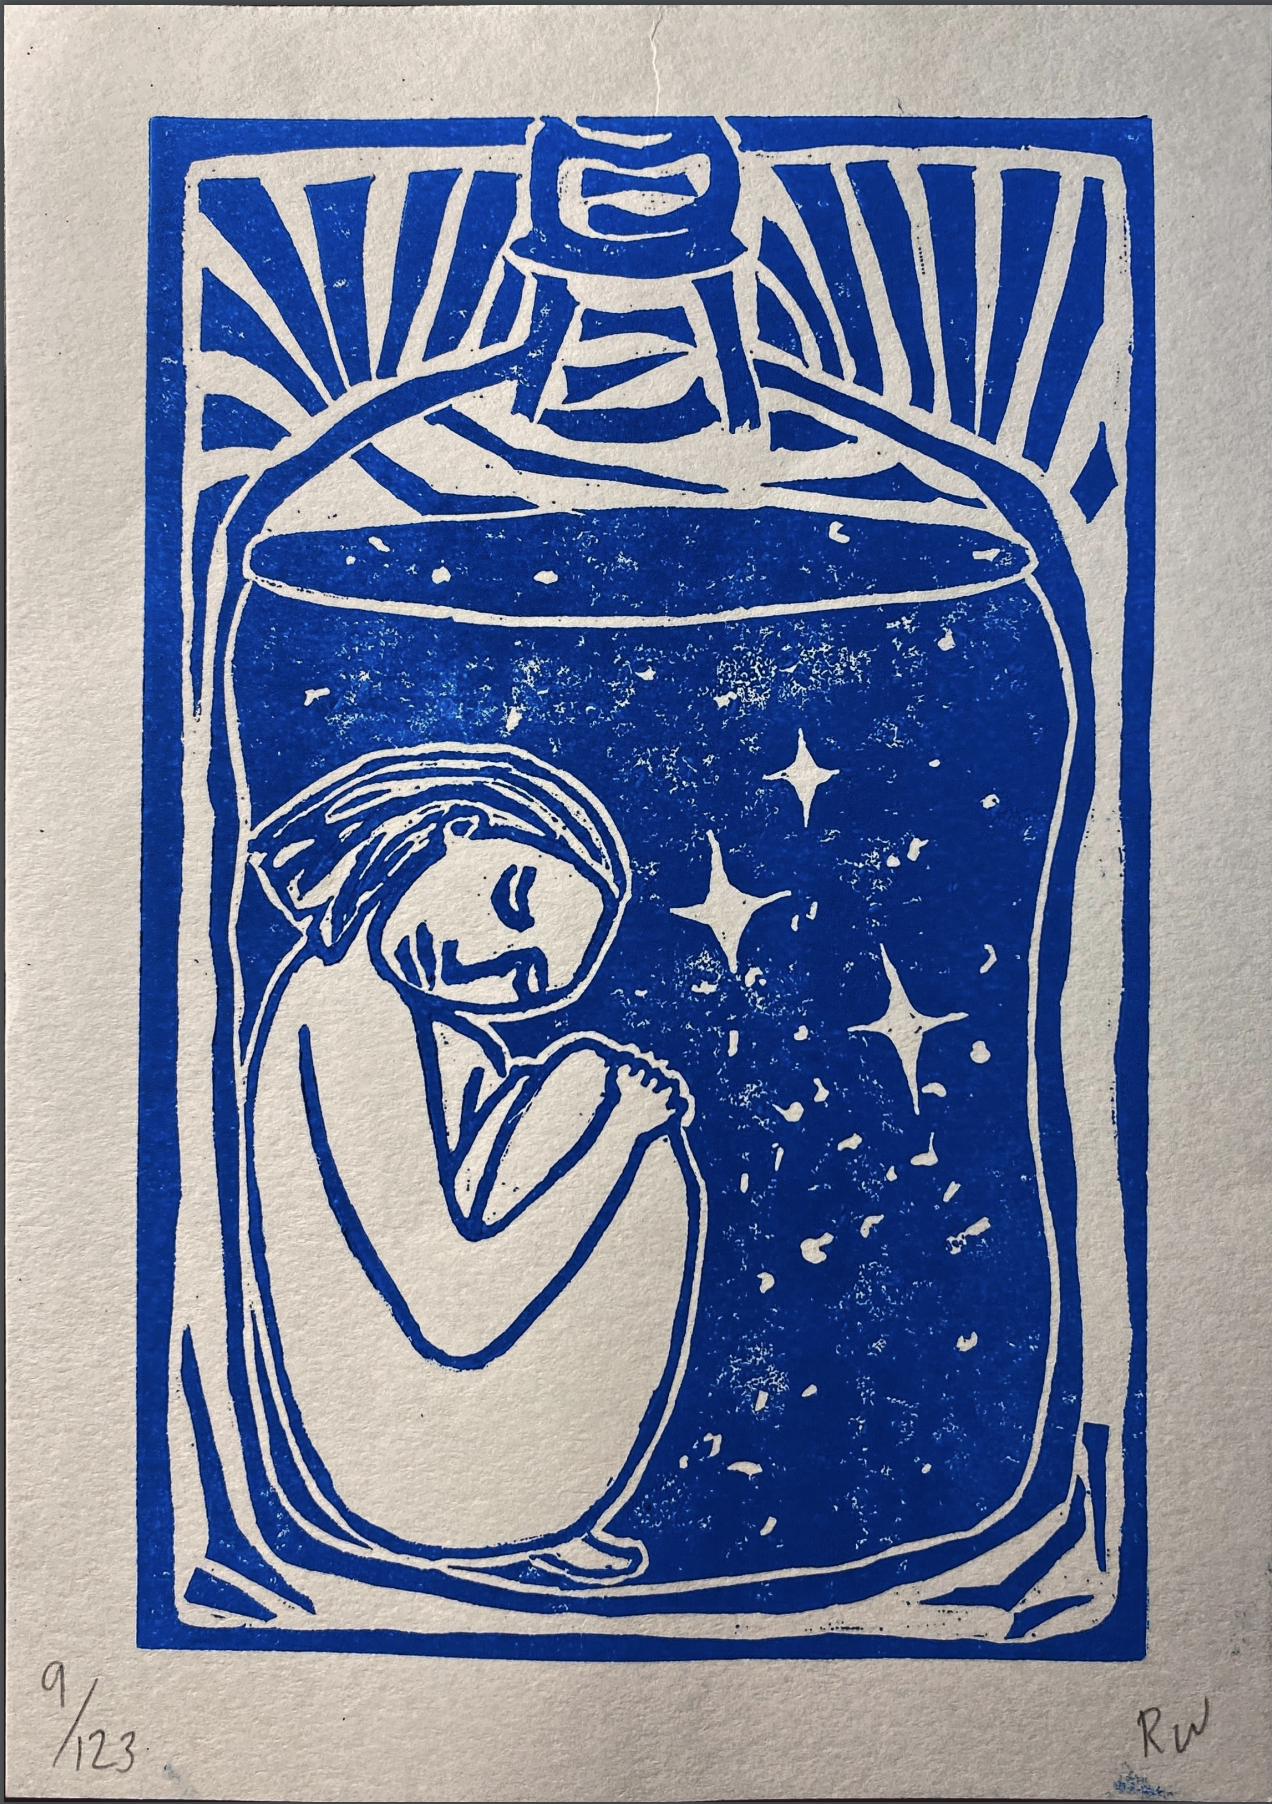 Untitled print showing a person in a bottle filled with stars, in blue ink